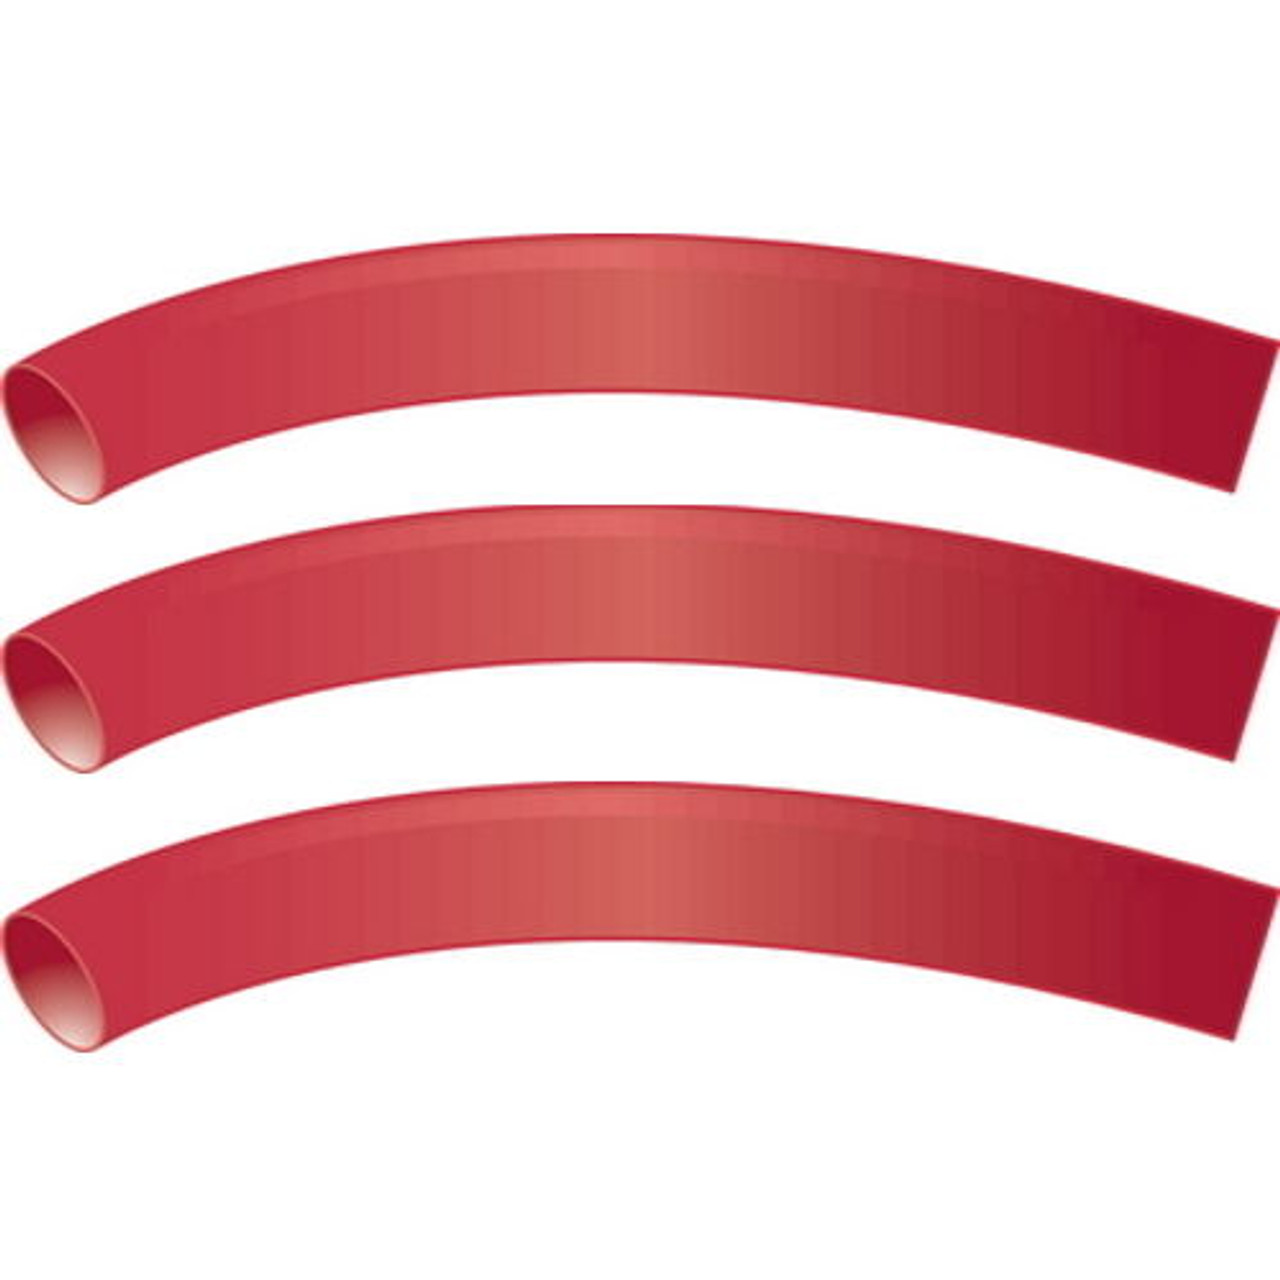 3 Pack of Red 3/8 Inch x 3 Inch 3:1 Heat Shrink Tubing with Sealant for Boats